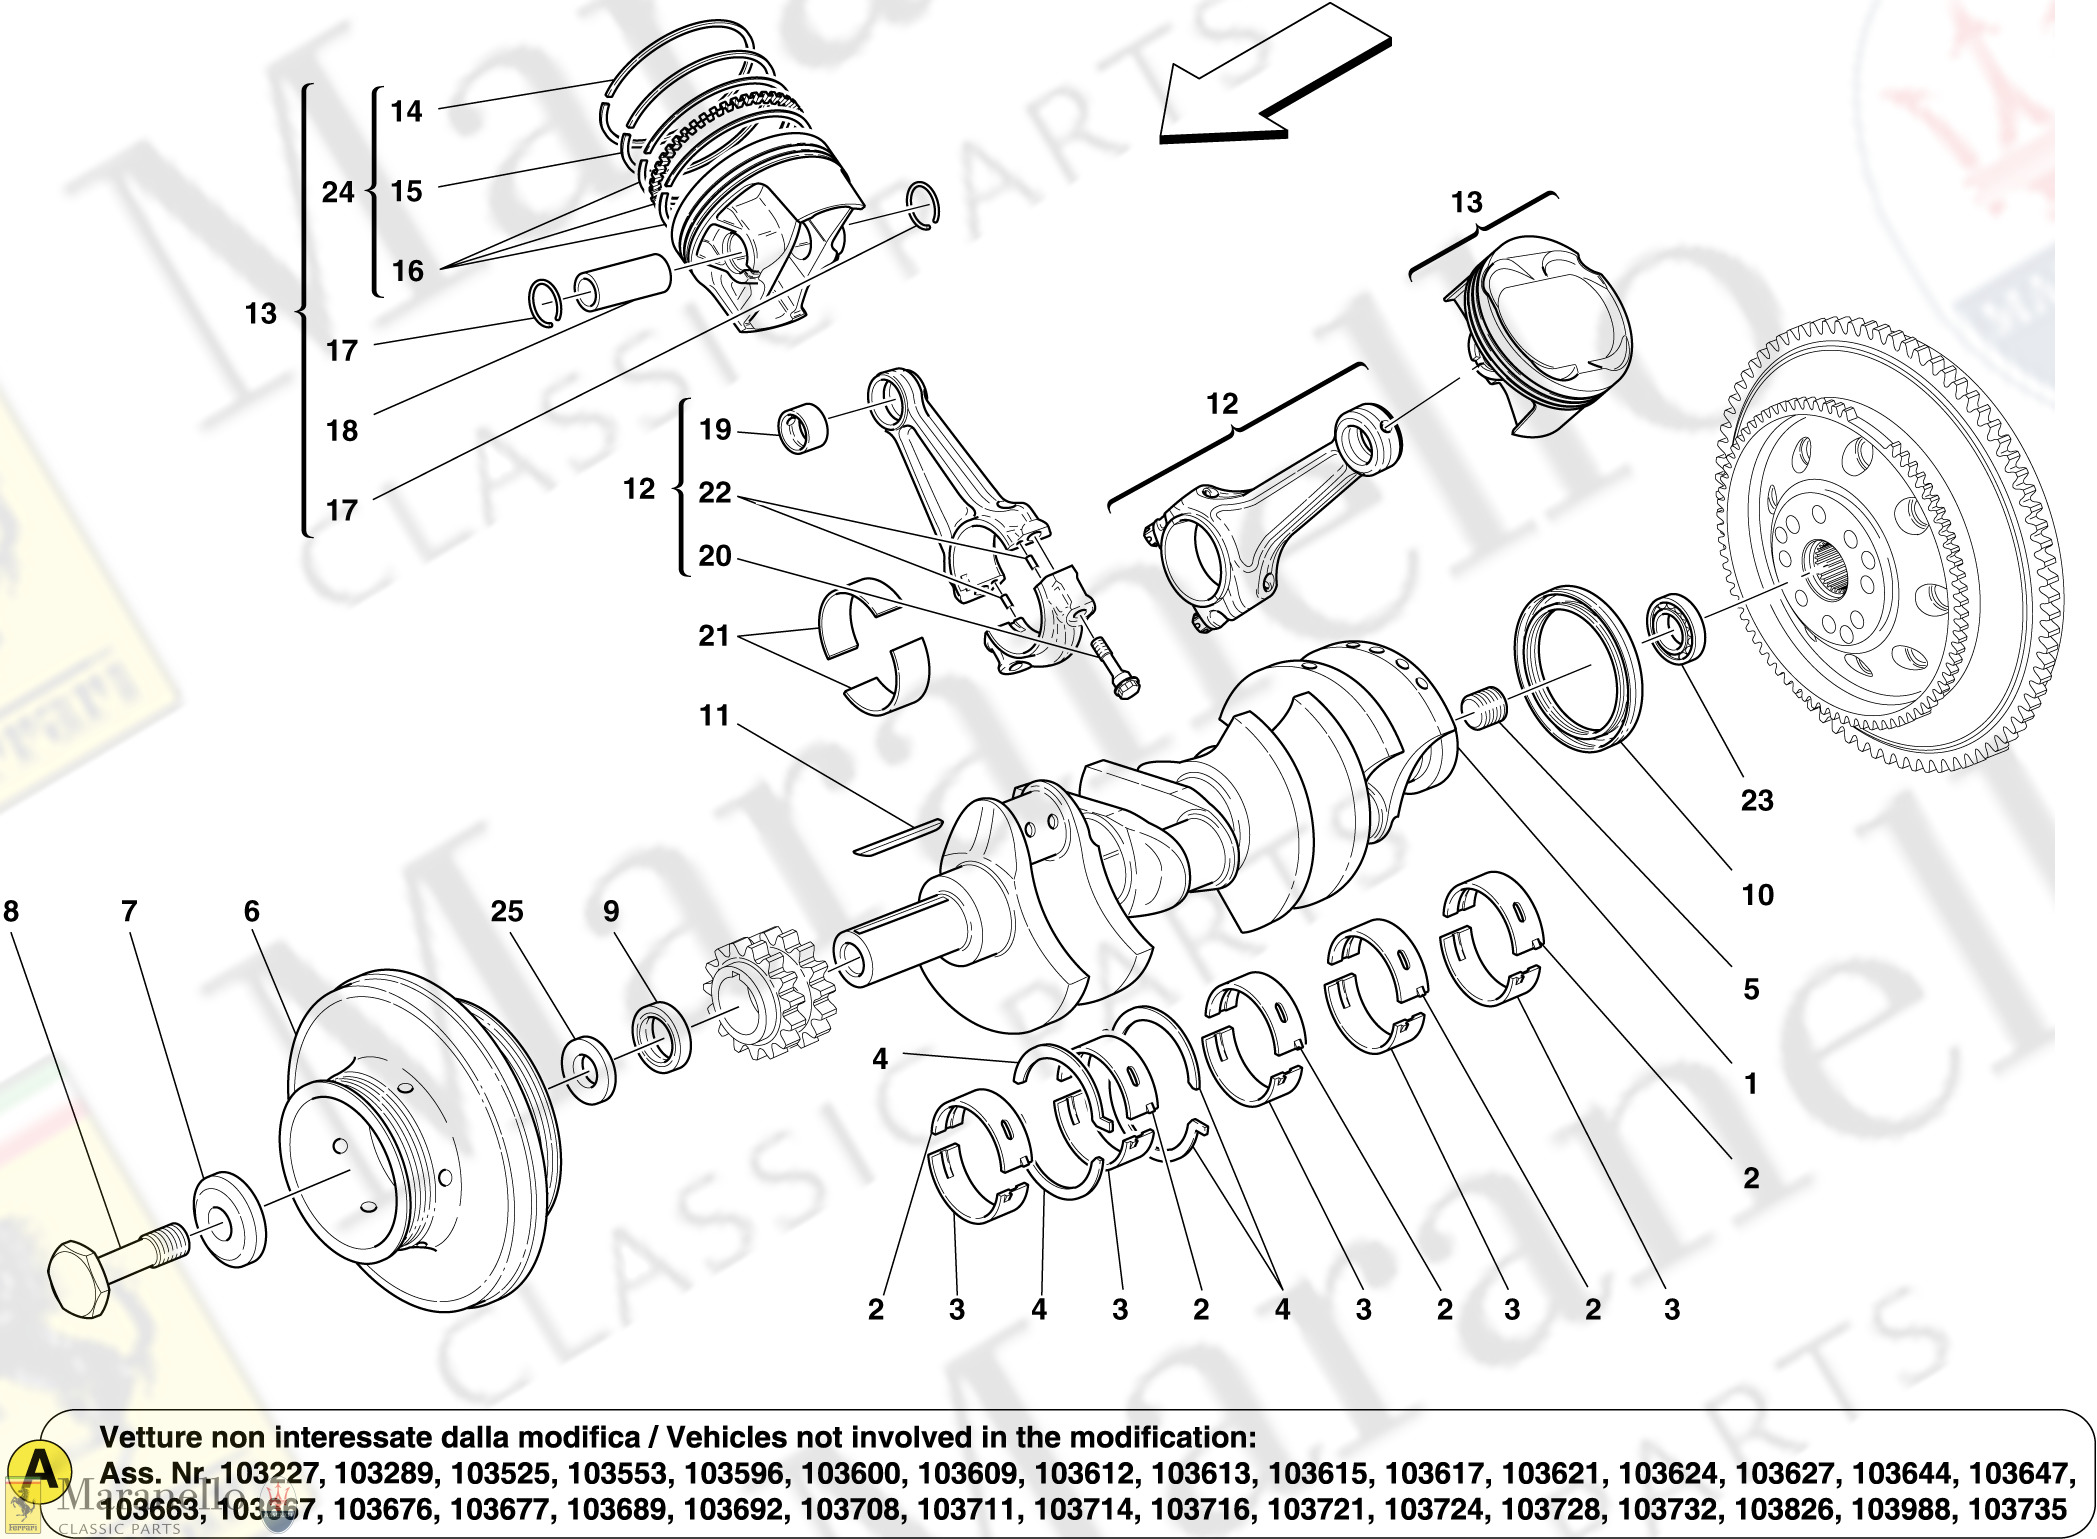 002 - Crankshaft, Connecting Rods And Pistons